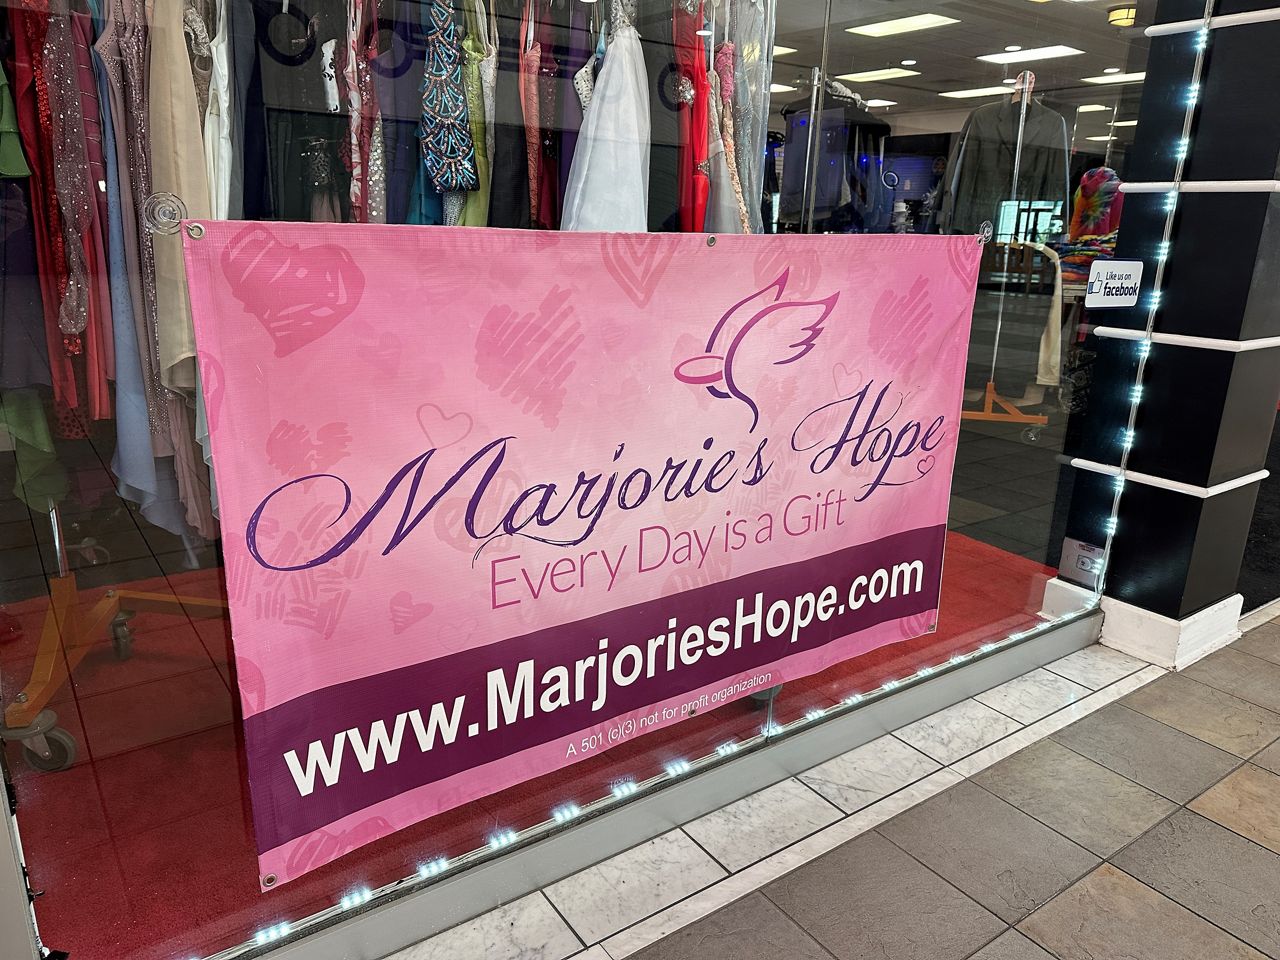 The sign for Marjorie’s Hope hangs in the Gemini Moon Rising shop at Gulf View Square Mall. (Spectrum News)